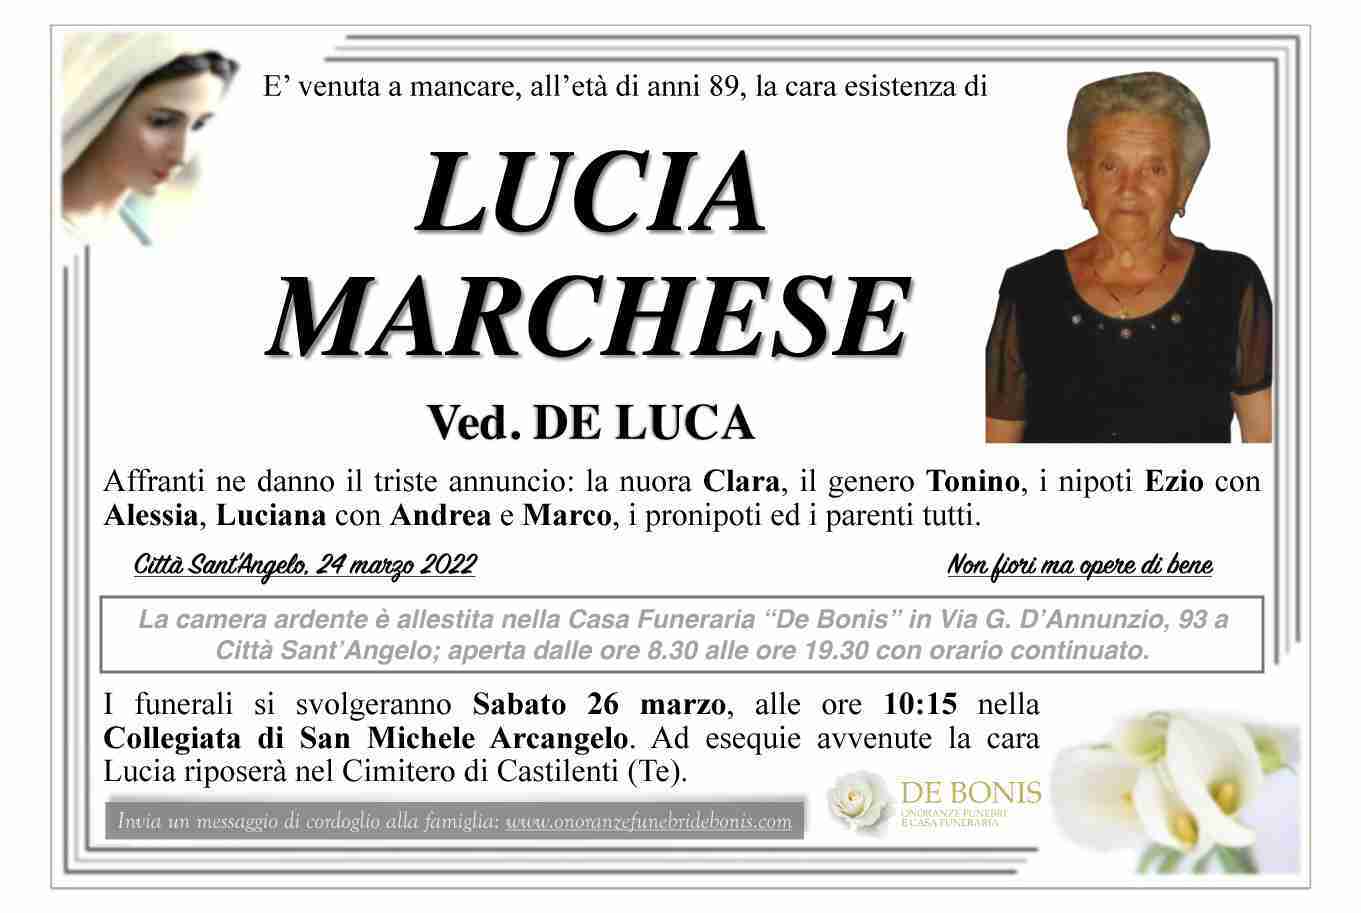 Lucia Marchese